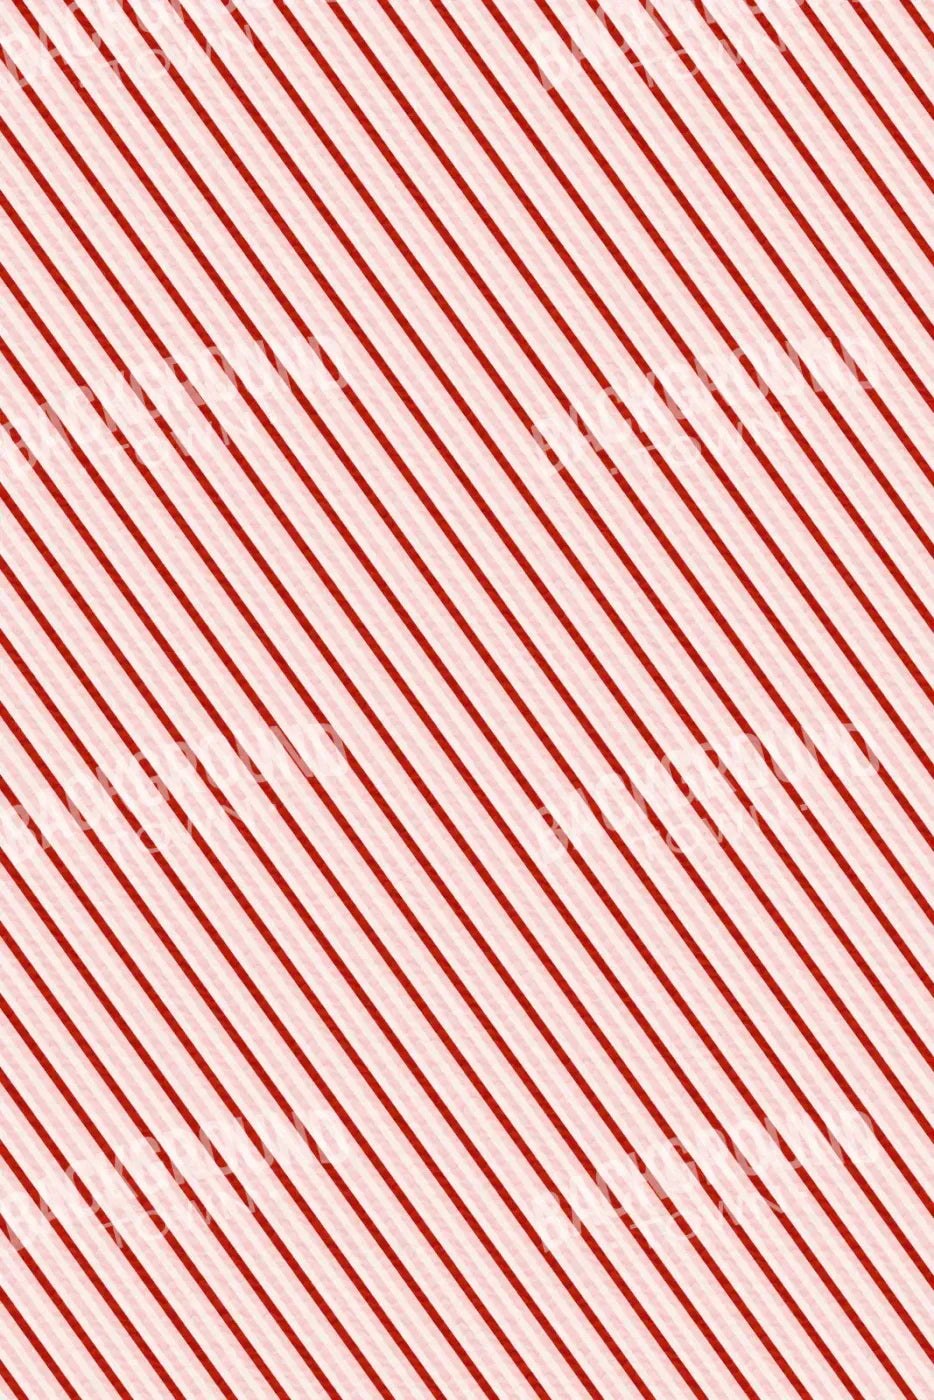 Candy Cane For Lvl Up Backdrop System 5X76 Up ( 60 X 90 Inch )